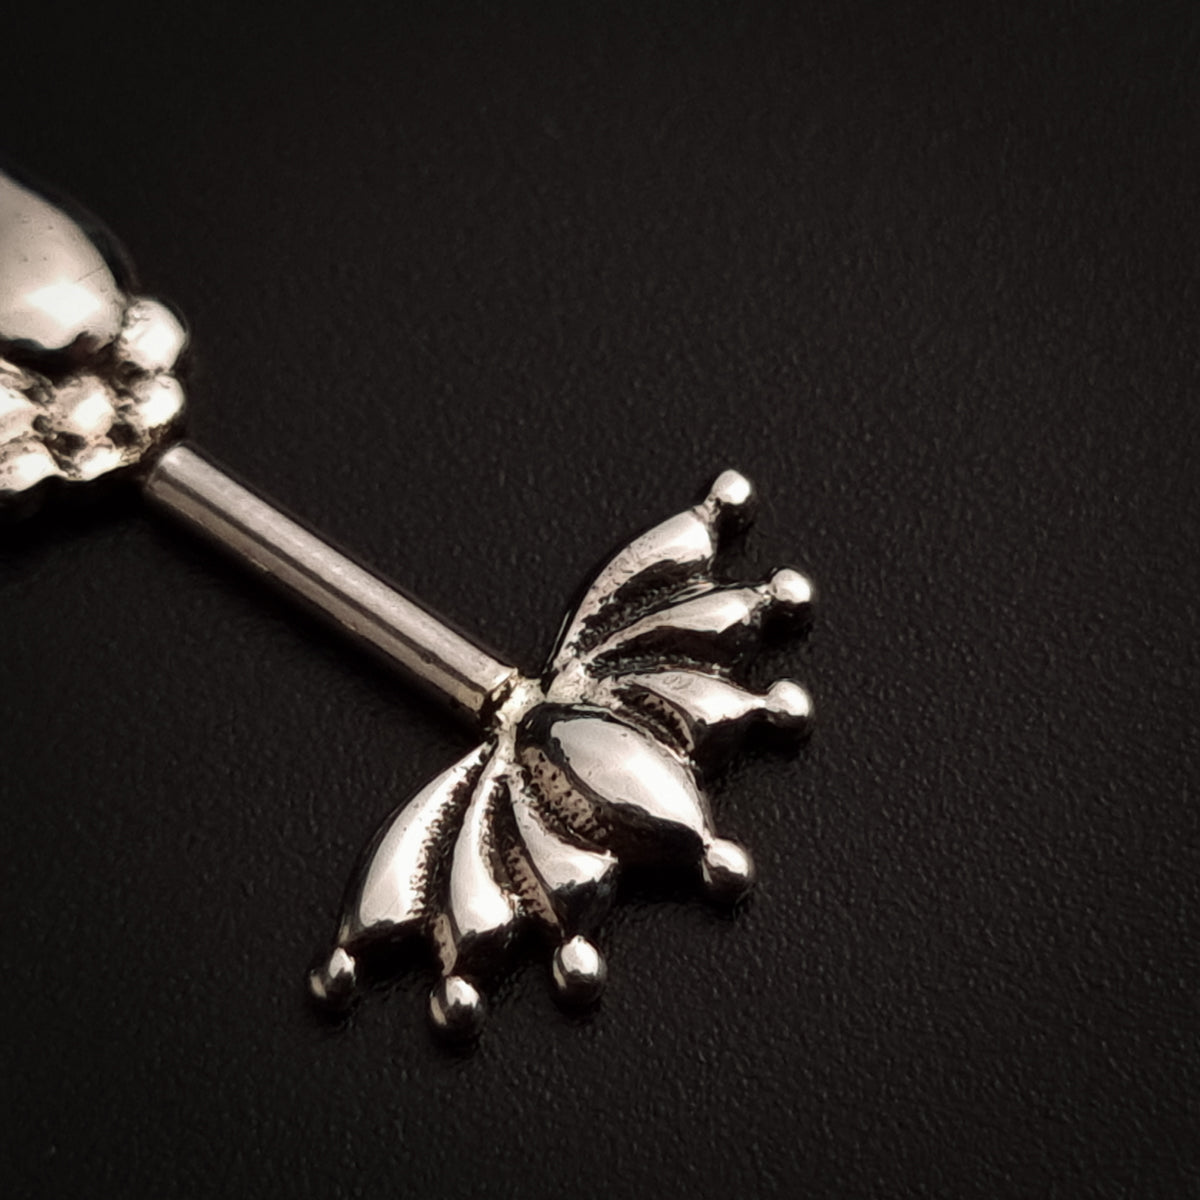 a silver spoon with a flower design on it